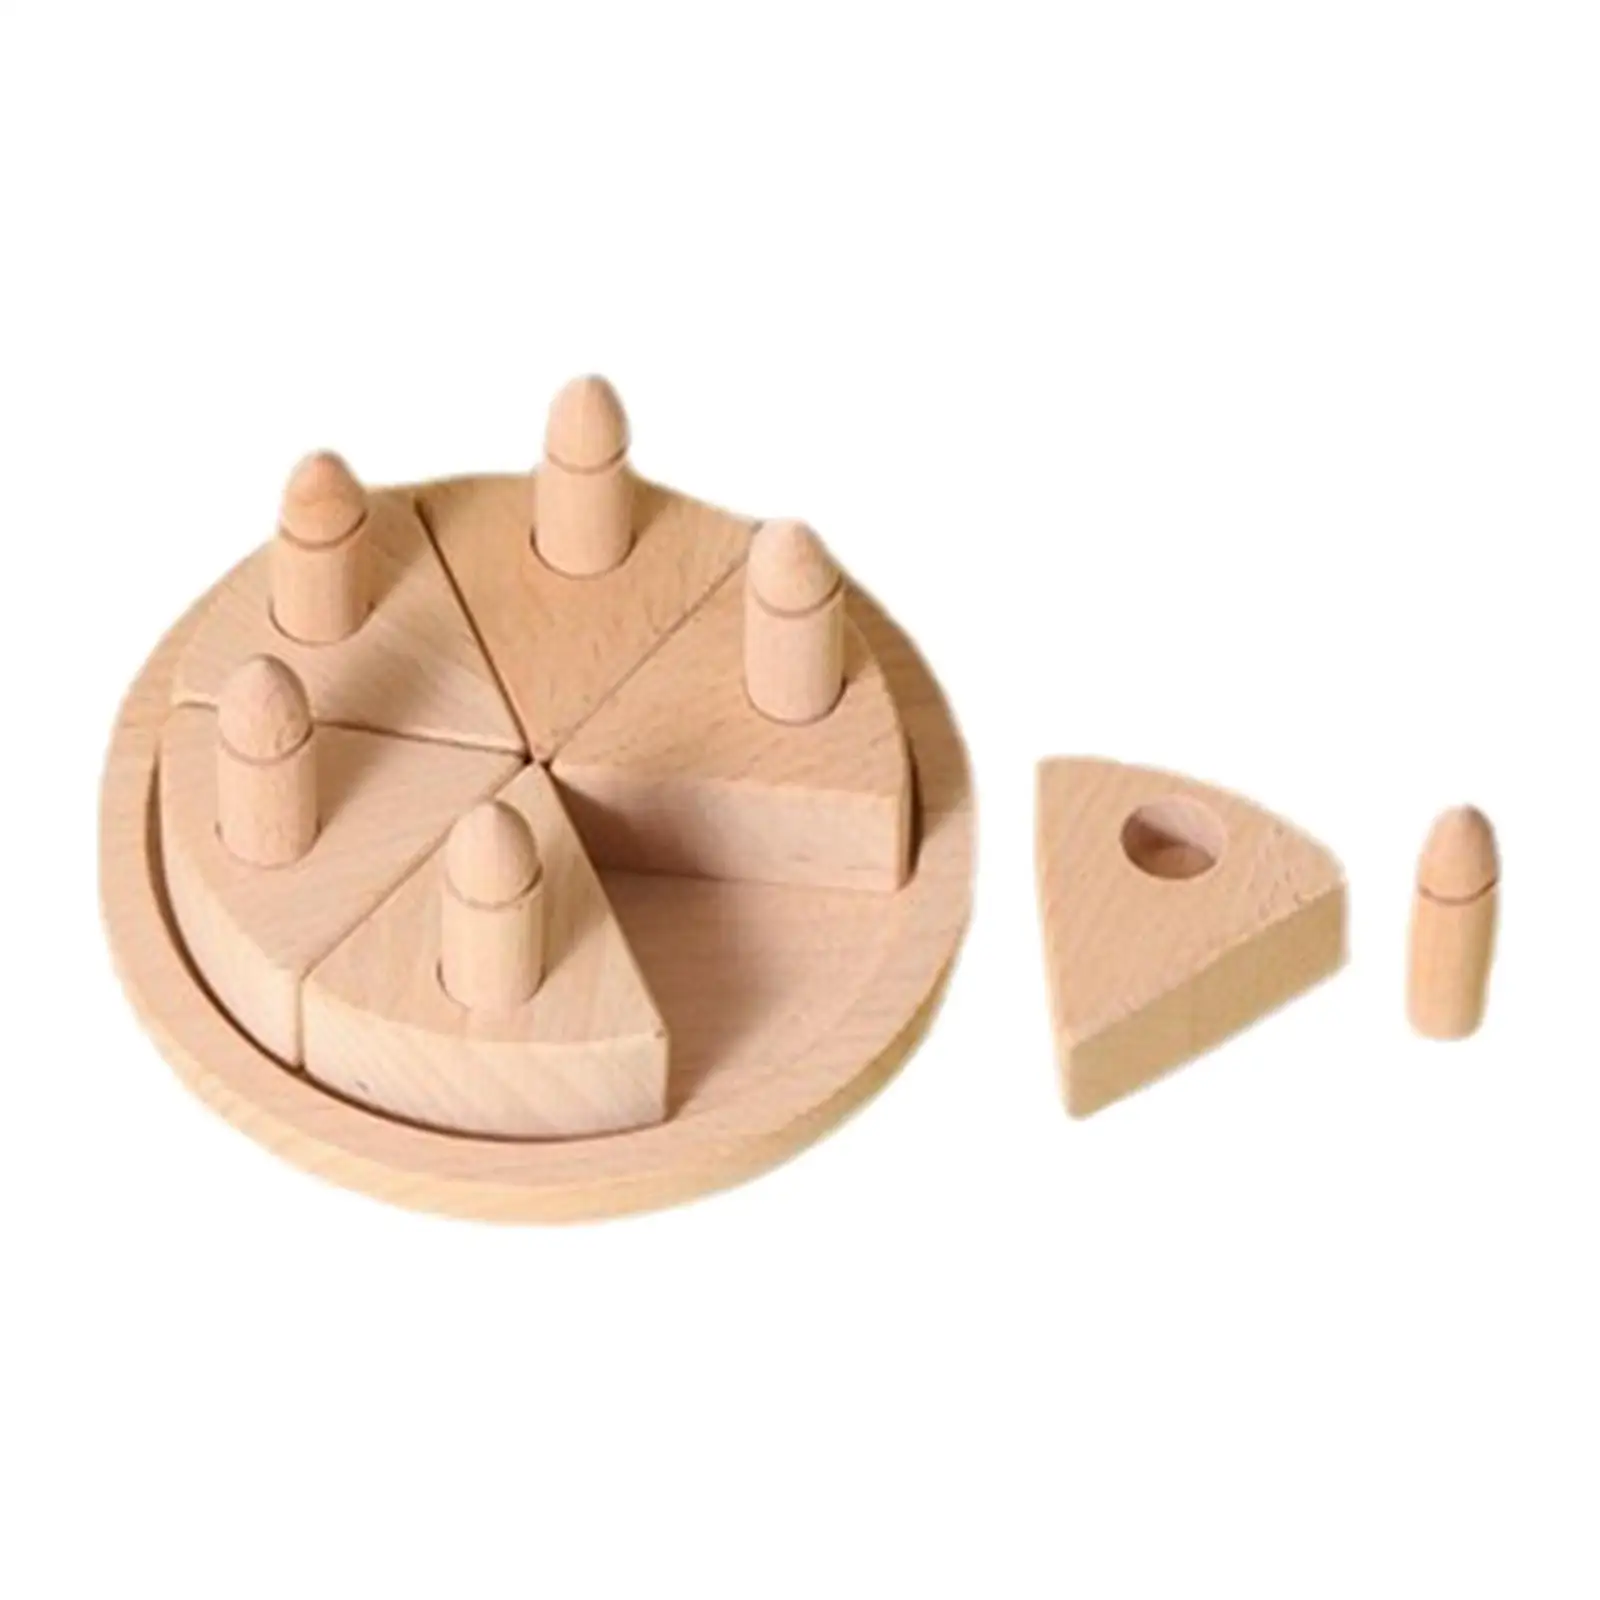 Wooden Cutting Birthday Cake Toys Birthday Fake Cake Toy Learning Educational Toddlers Cake Set for Children Birthday Gifts